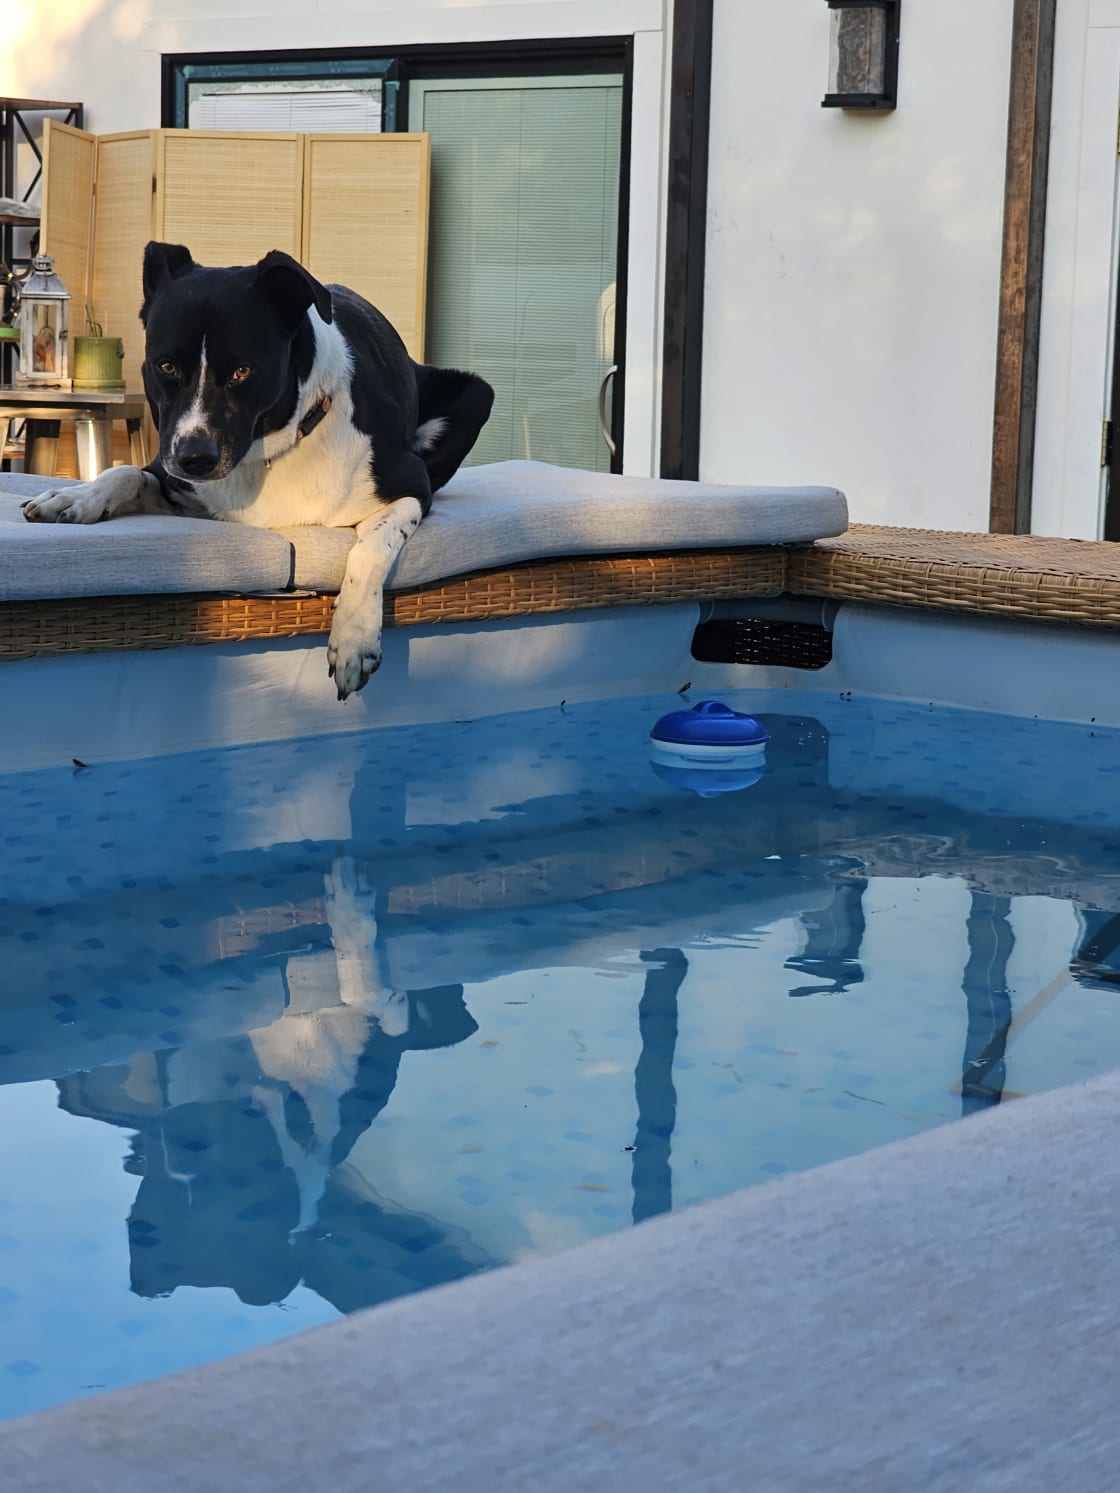 Toby loves the pool!  I've taught him to climb out the ladder. The pool is 3.5' deep. Toby can actually stand on his hind legs with head out.